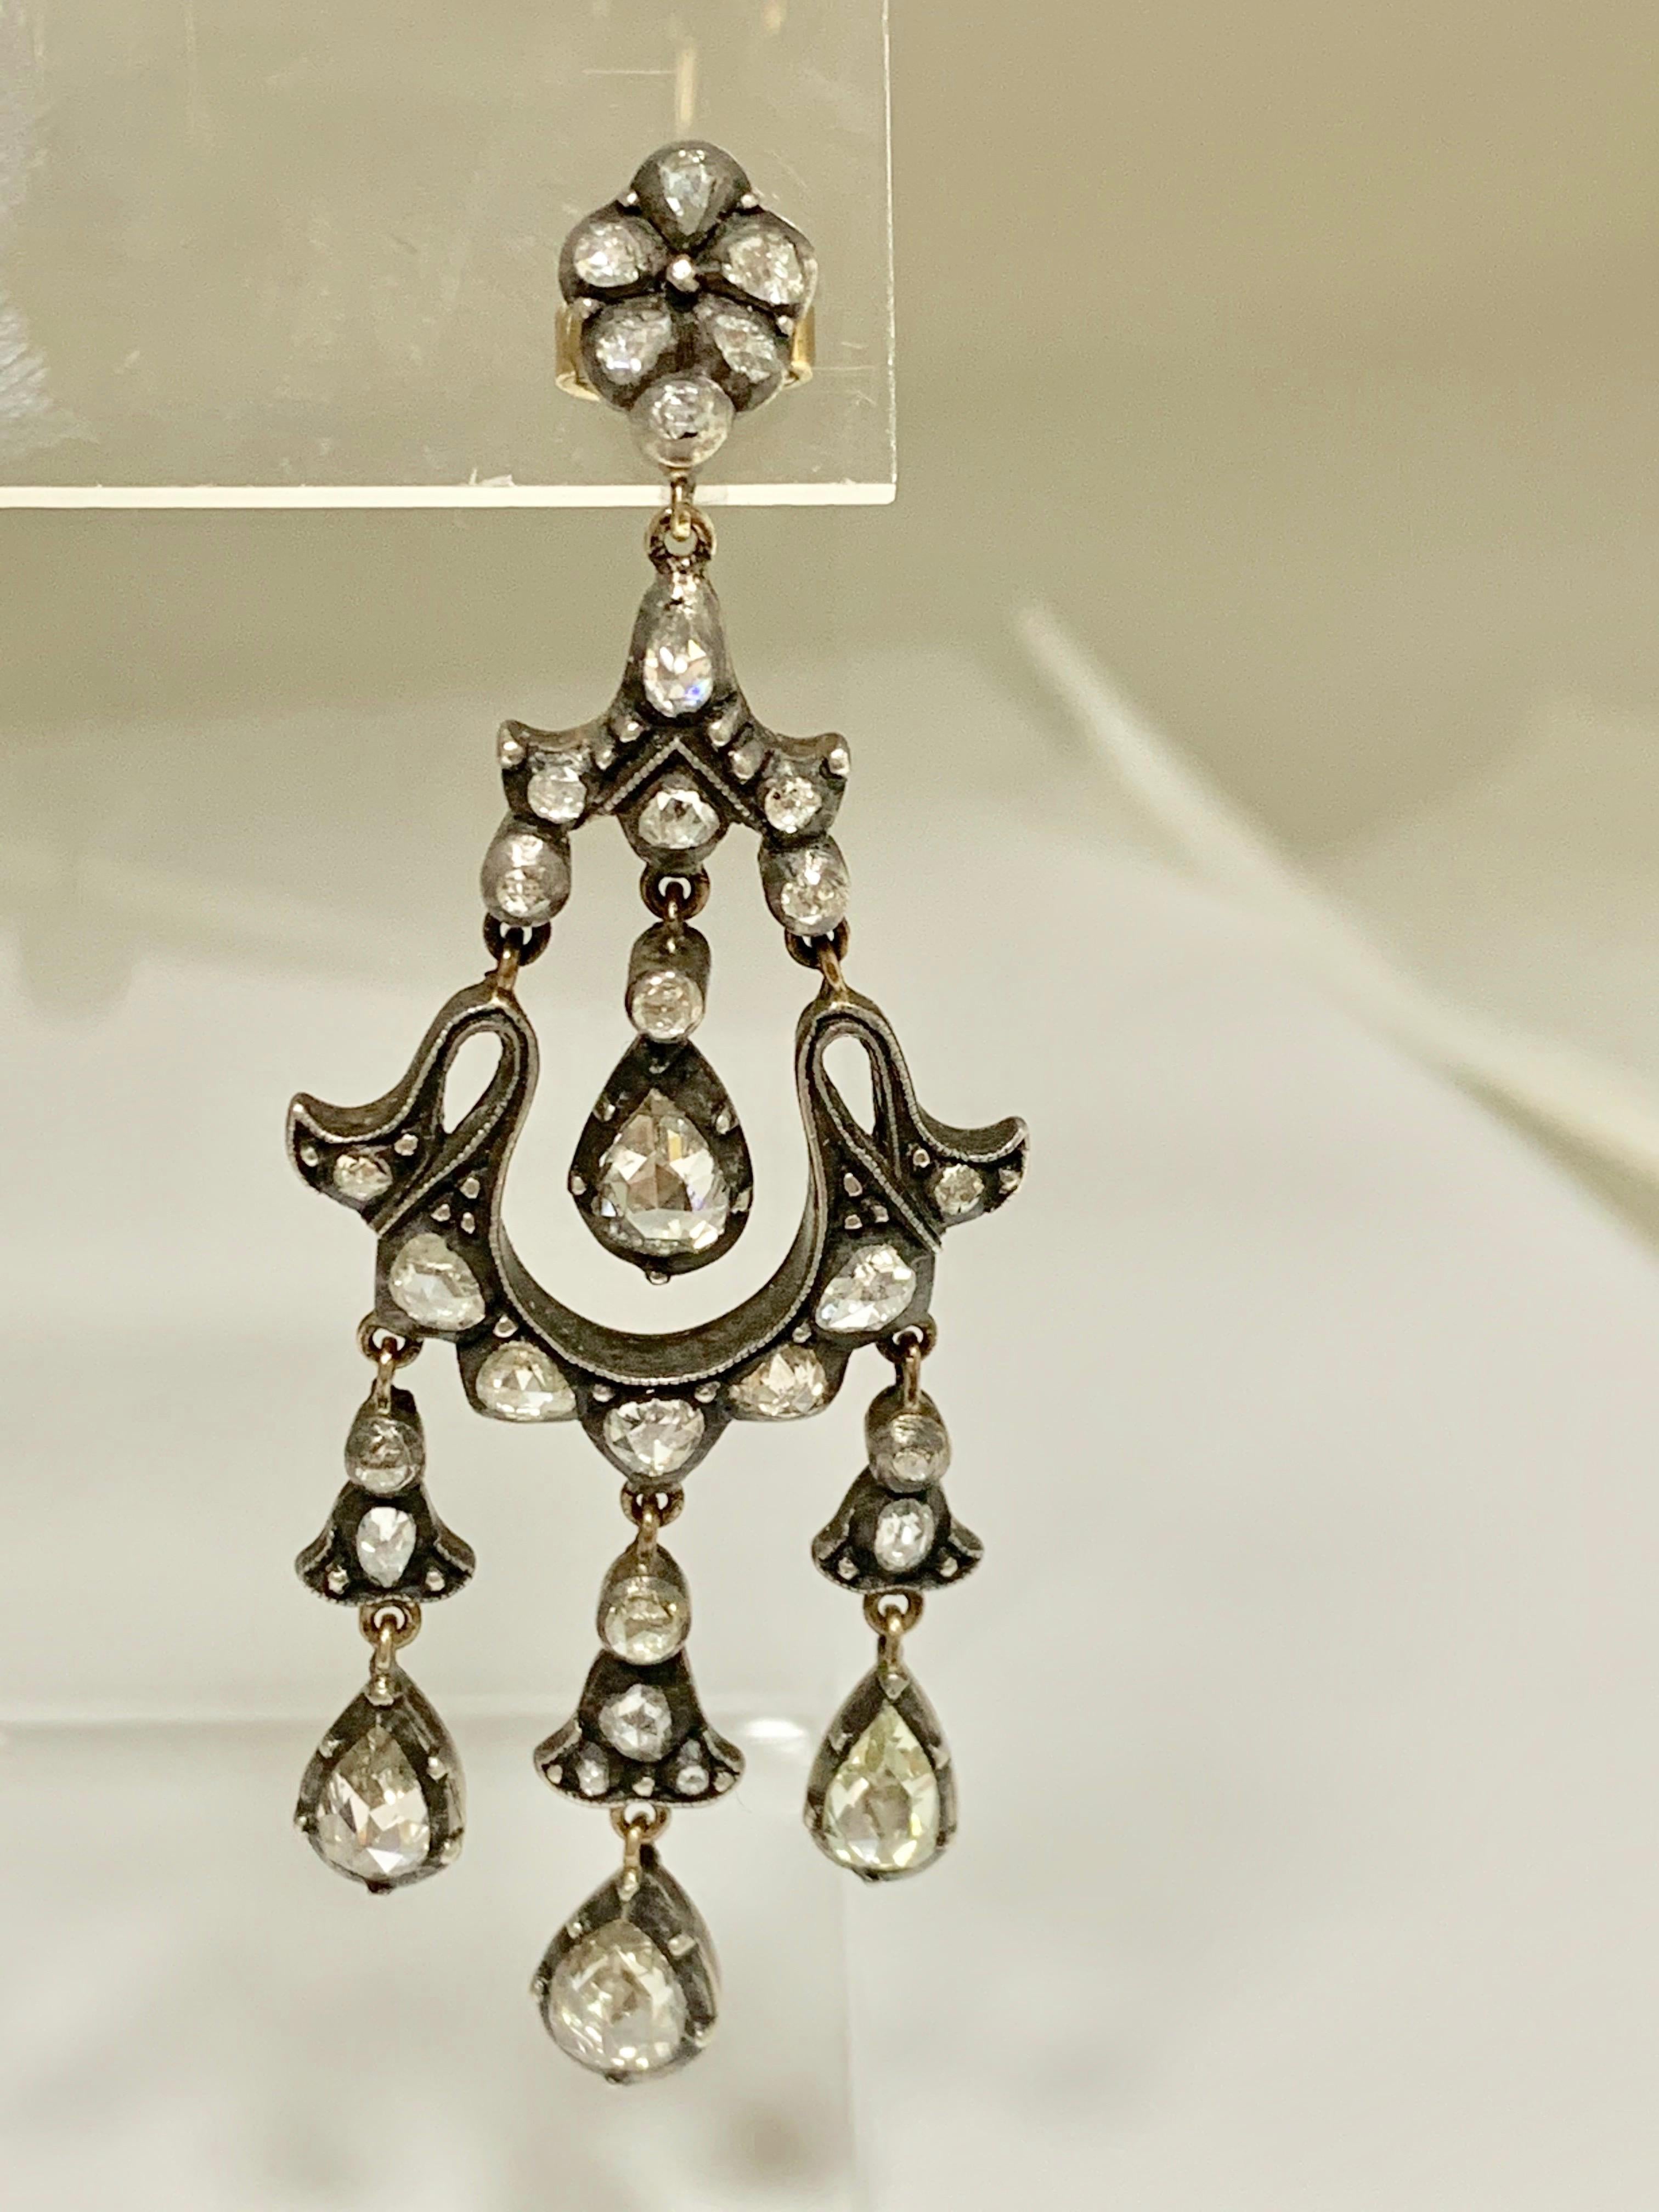 6 Carat Rose Cut Diamond Antique Style Chandelier Earrings in 18 Karat Gold In New Condition For Sale In New York, NY